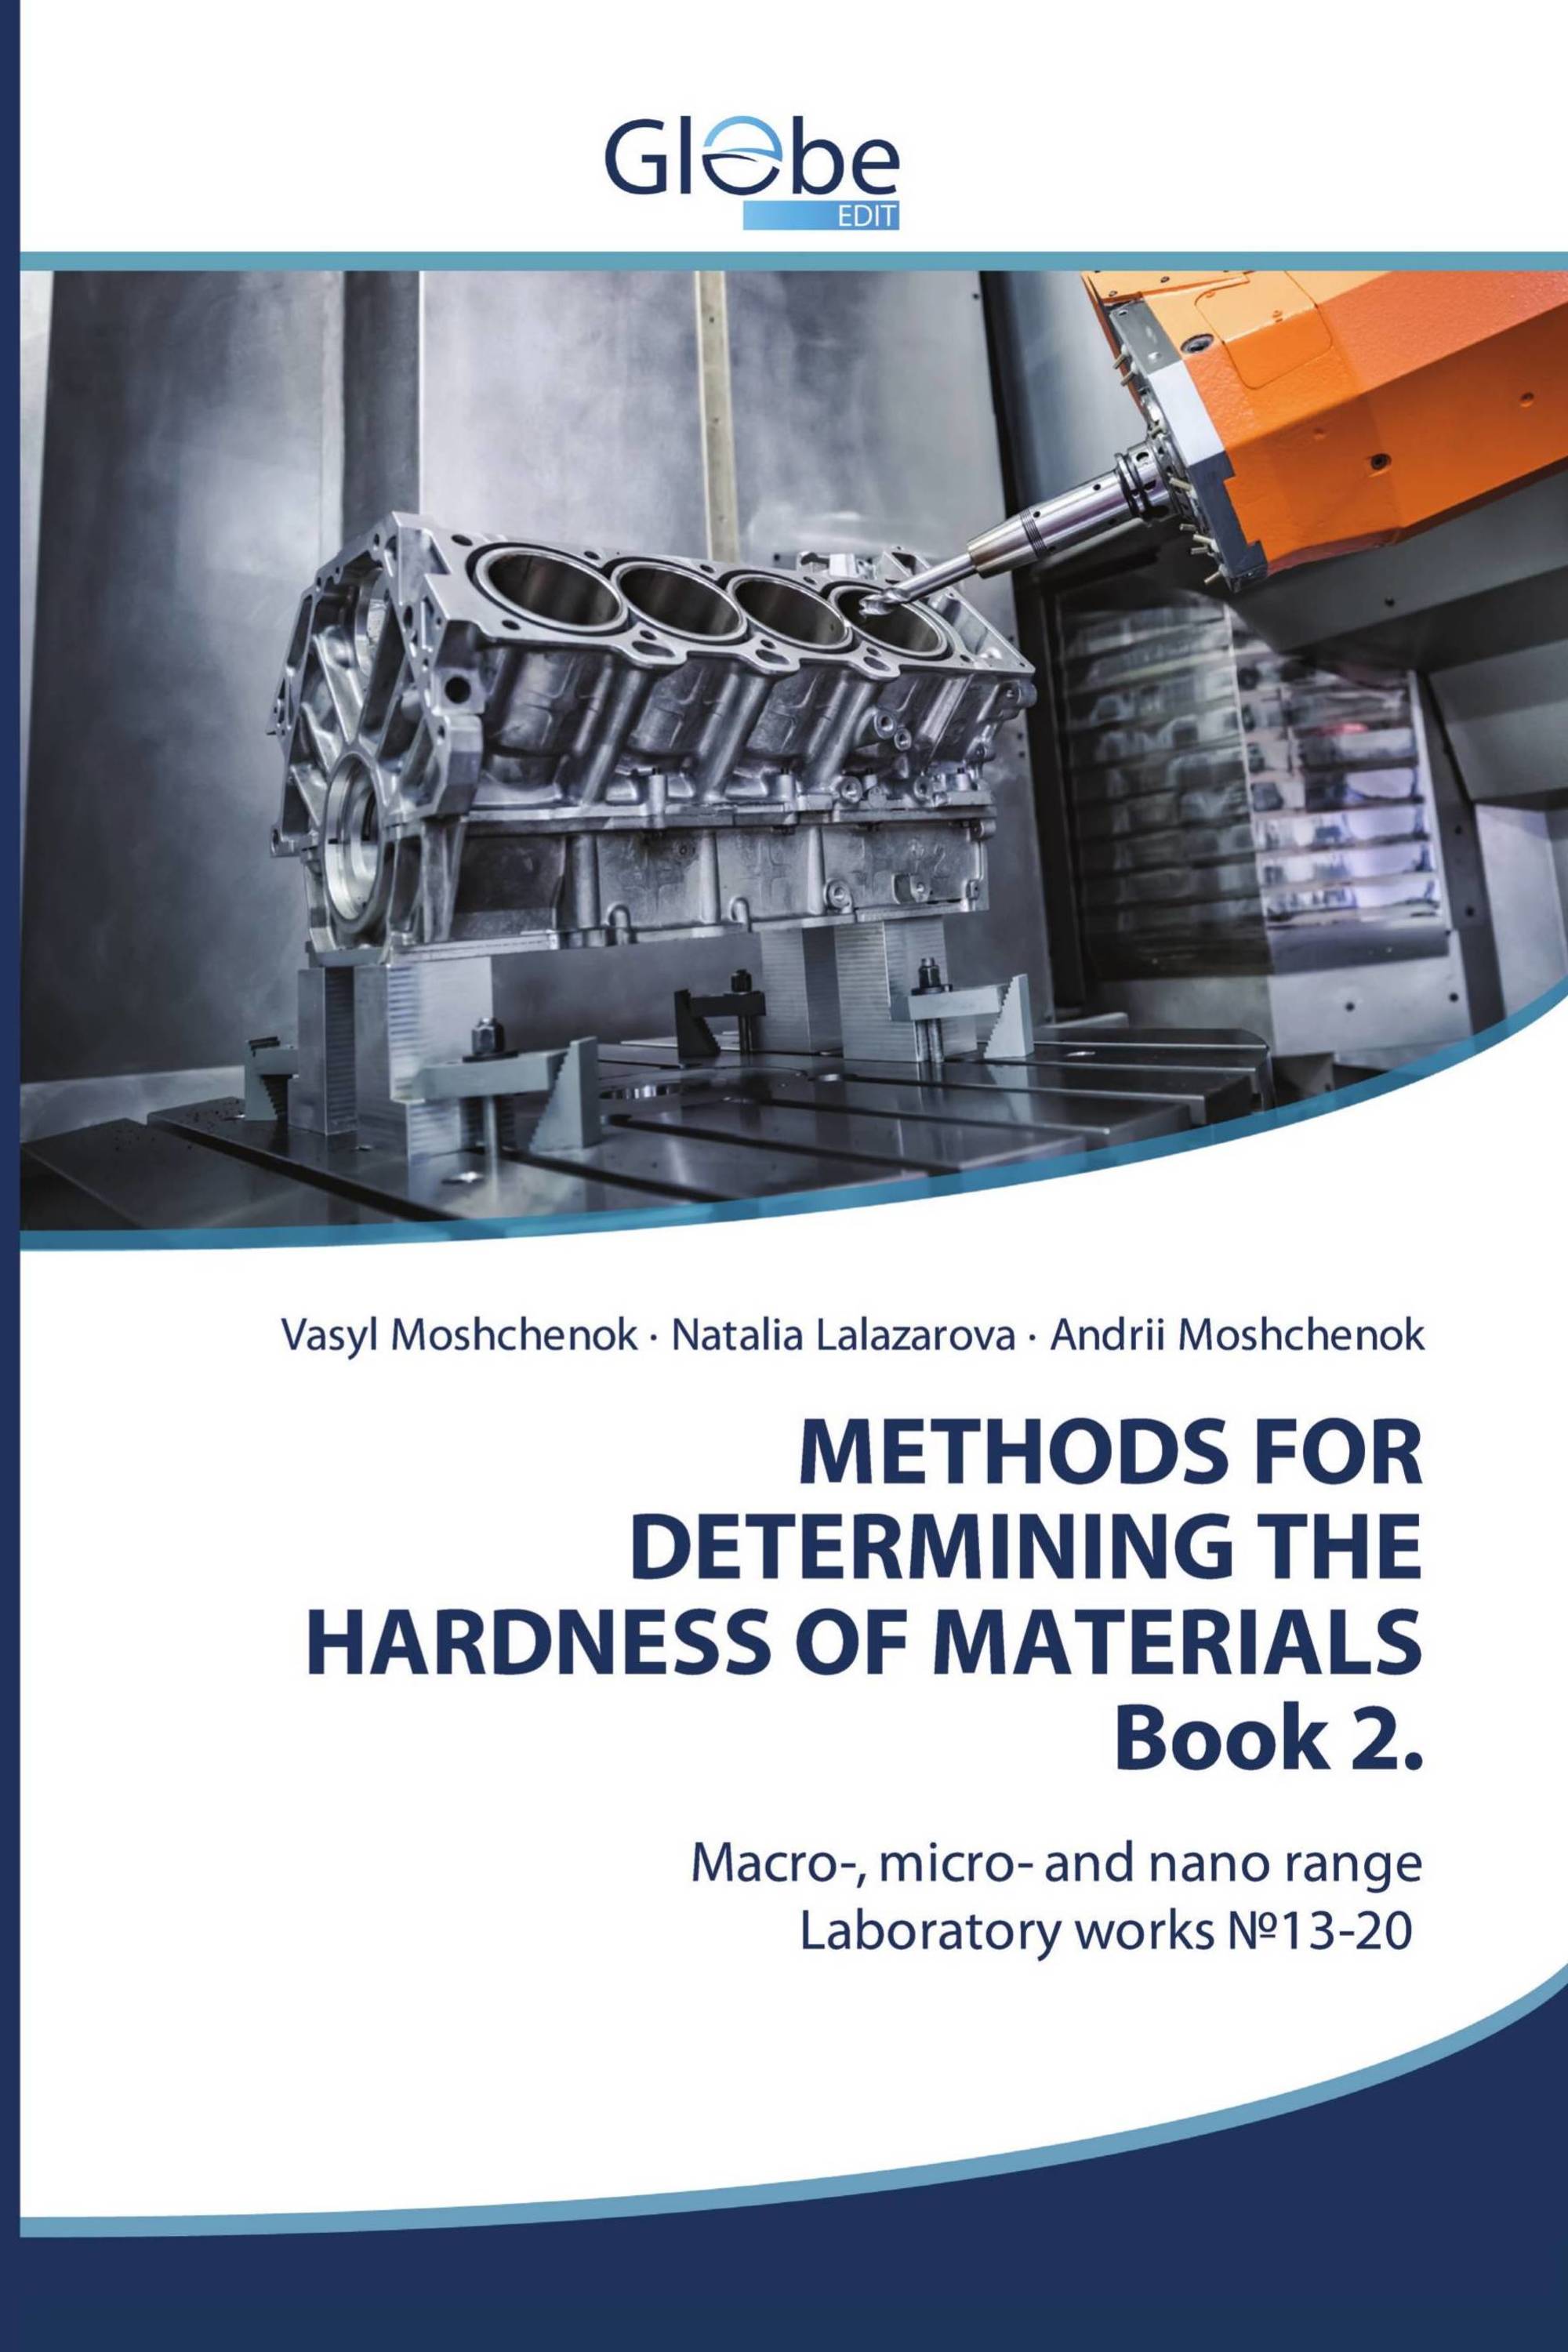 METHODS FOR DETERMINING THE HARDNESS OF MATERIALS Book 2.